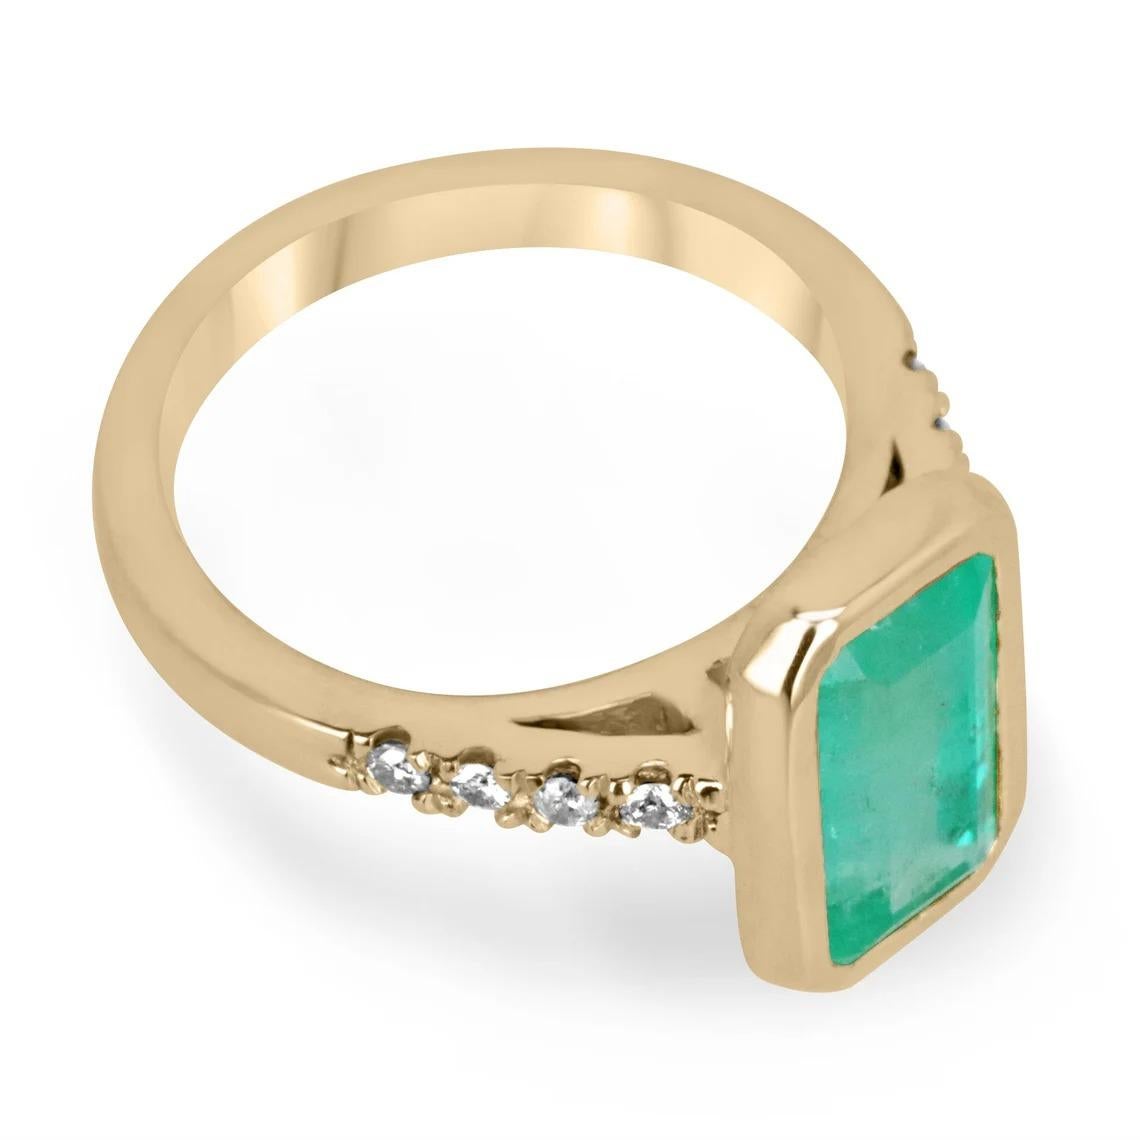 A glowing Colombian emerald bezel and diamond accent ring. This spectacular piece features an elongated emerald cut emerald from the best mines in the world, Colombia. The gemstone showcases a sweet bluish-green color that is vivacious and lustrous.